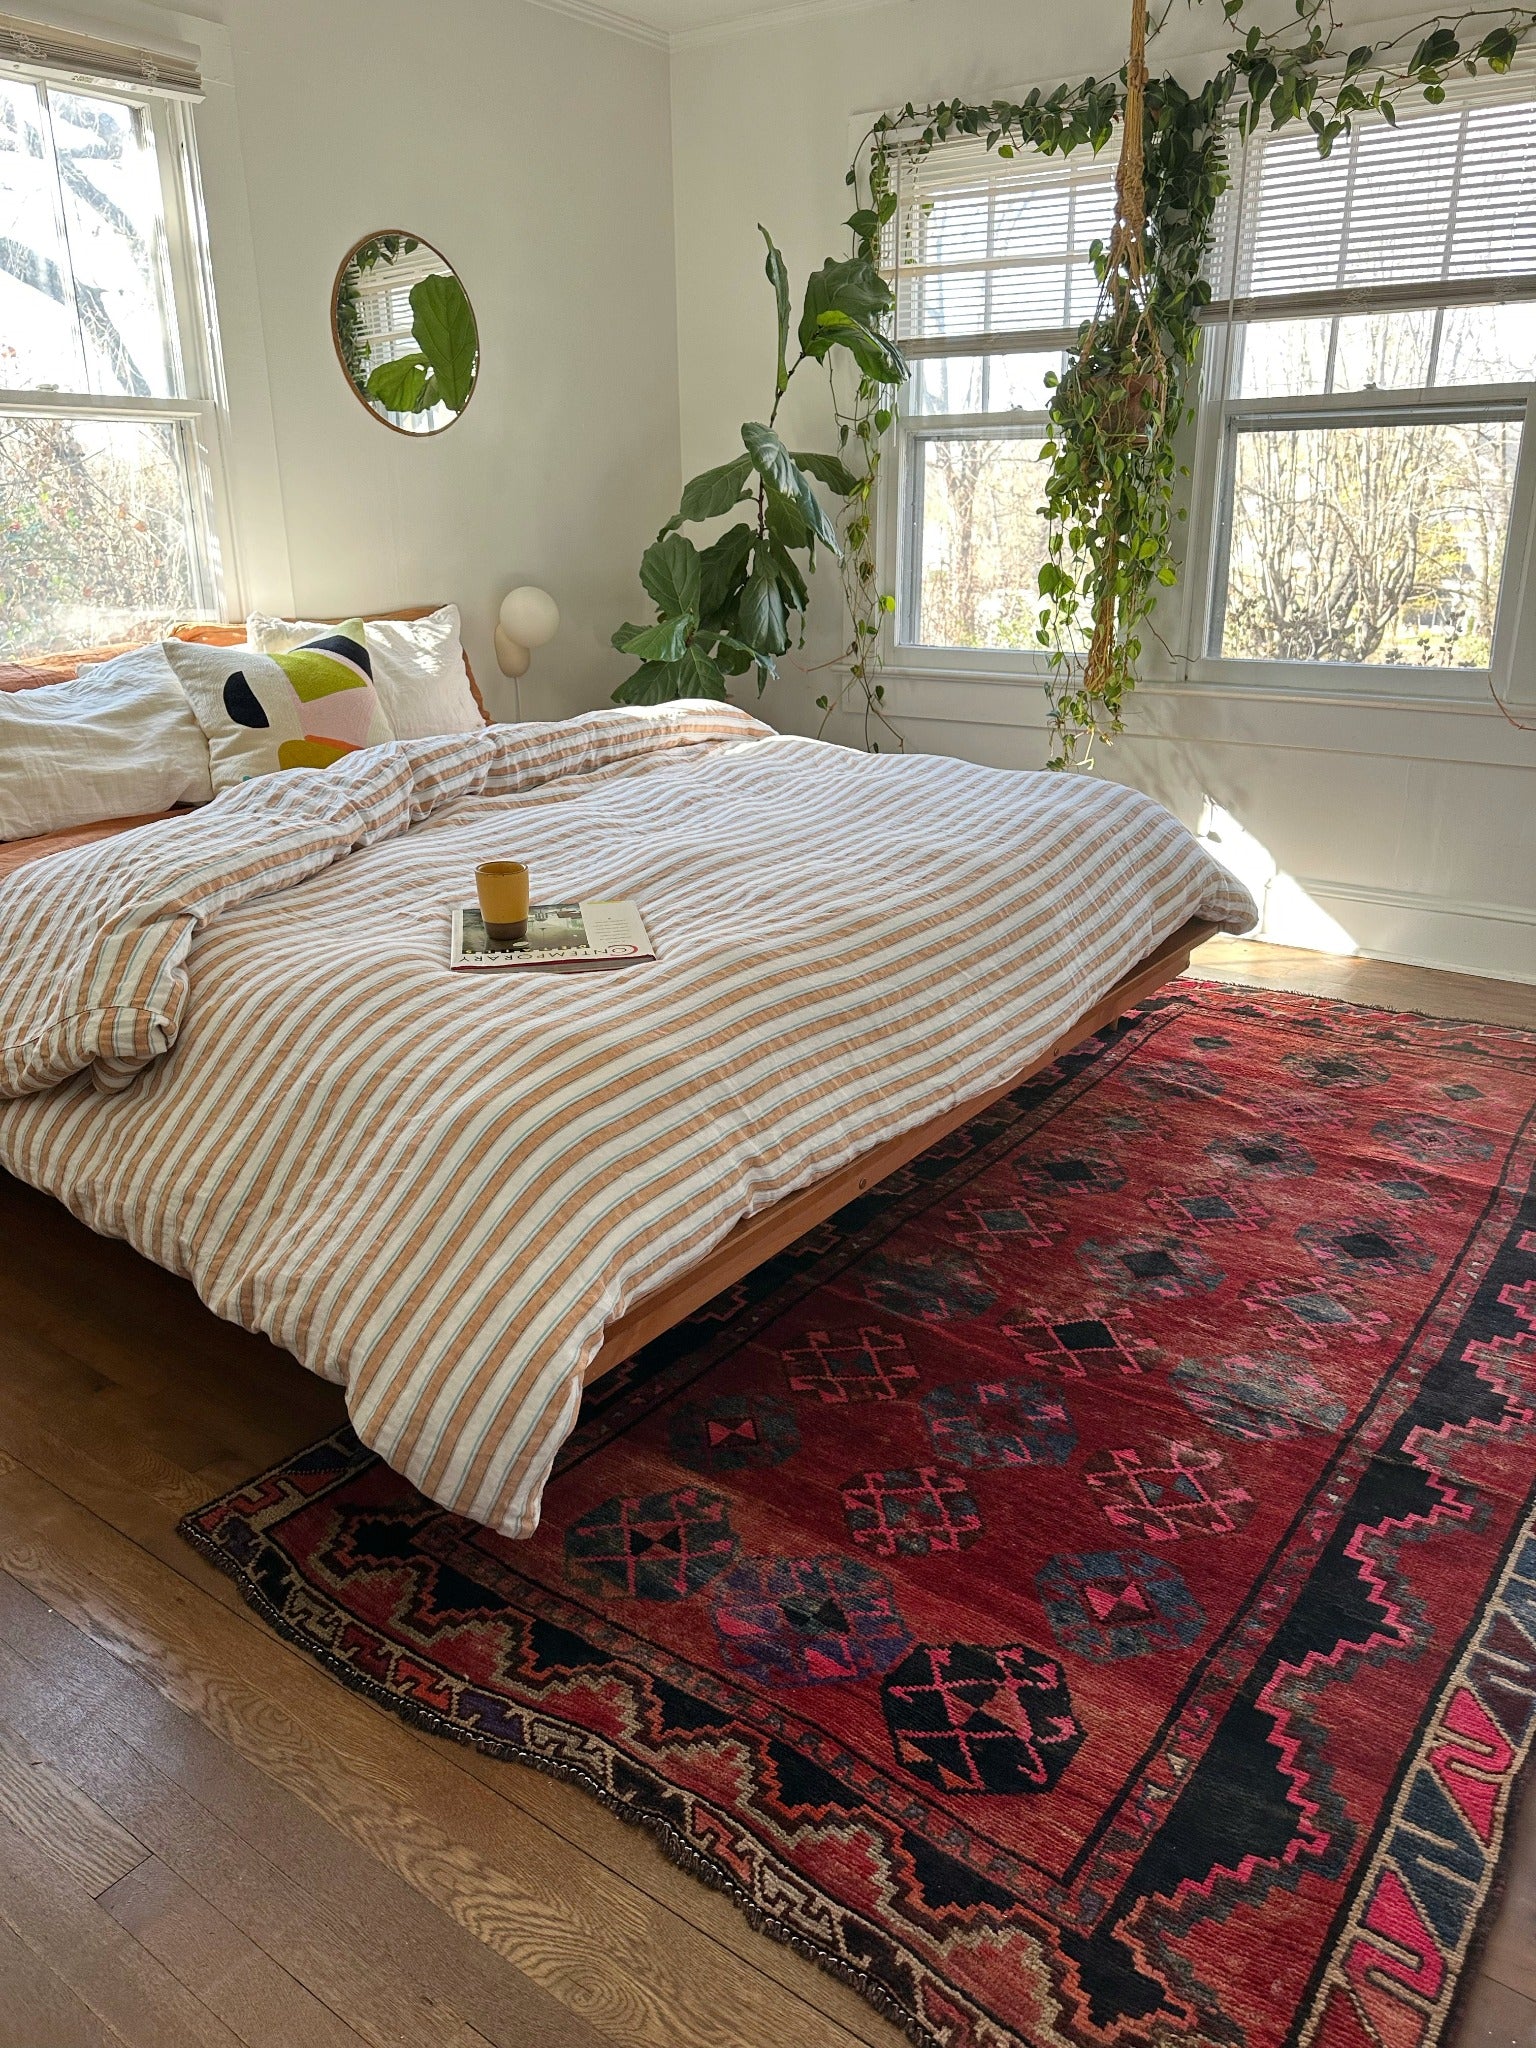 Style Hyssop Persian Rug with a King Size Bed